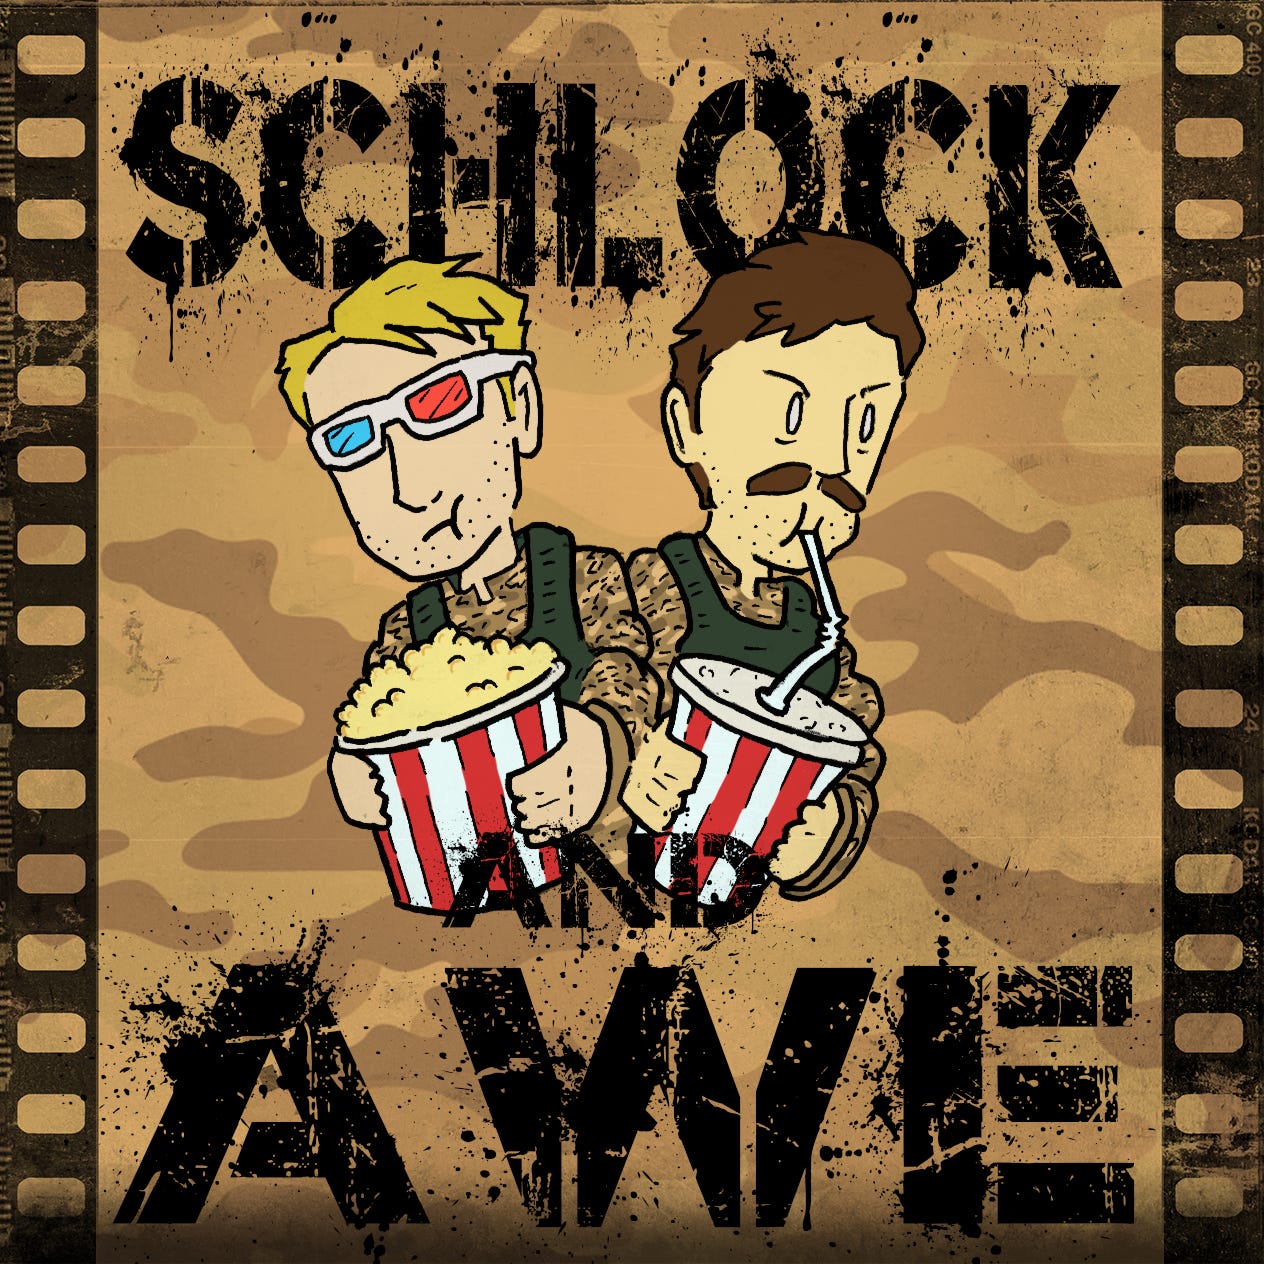 Schlock and Awe